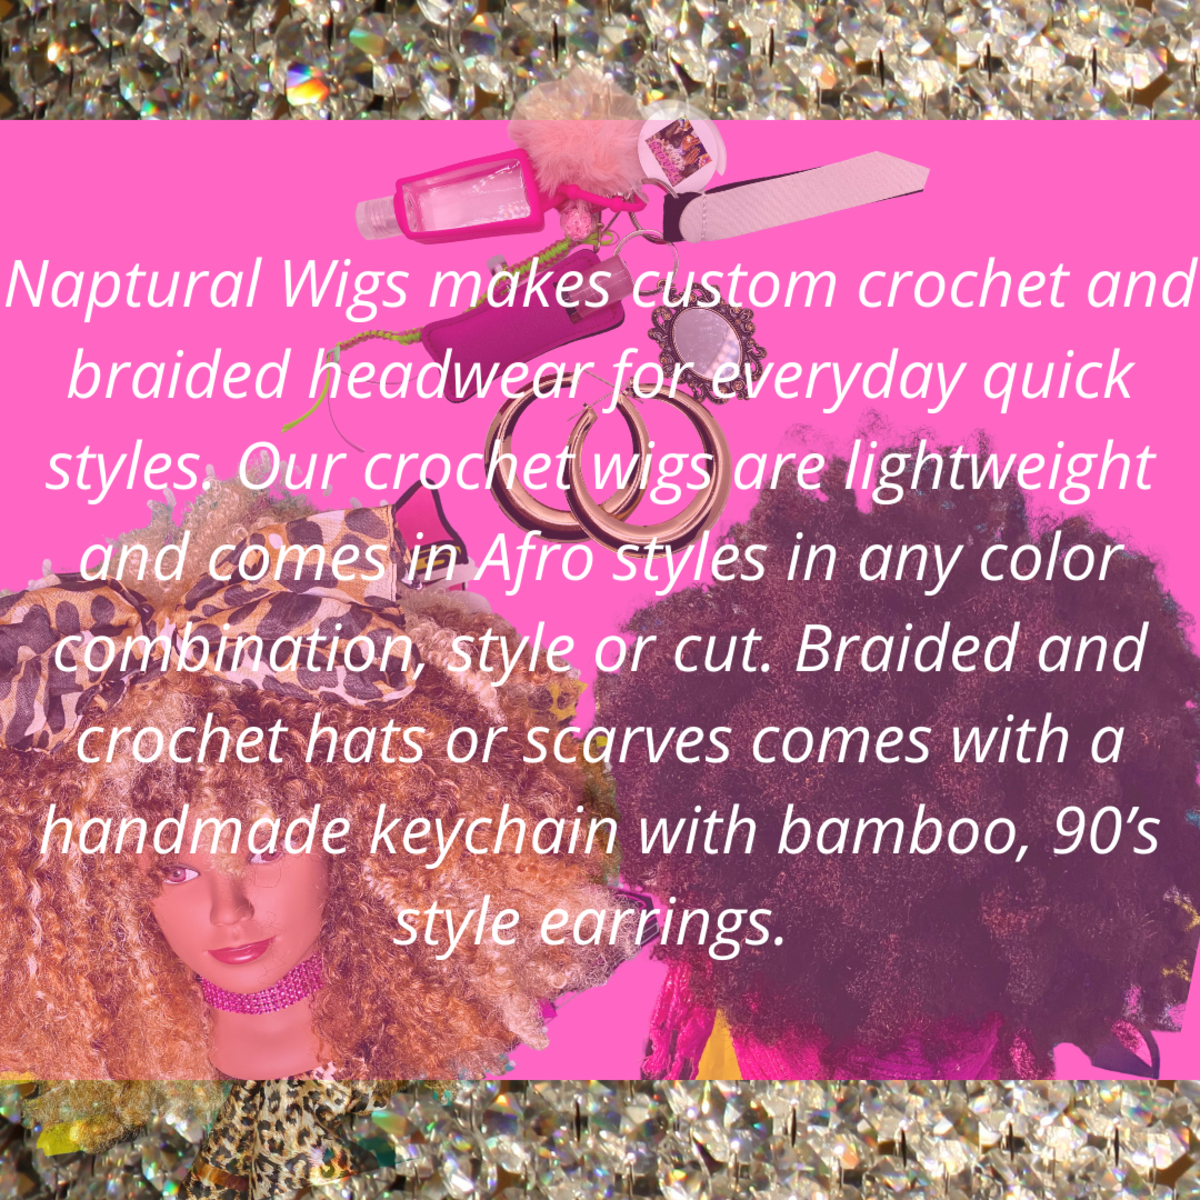 check-out-naptural-wigs